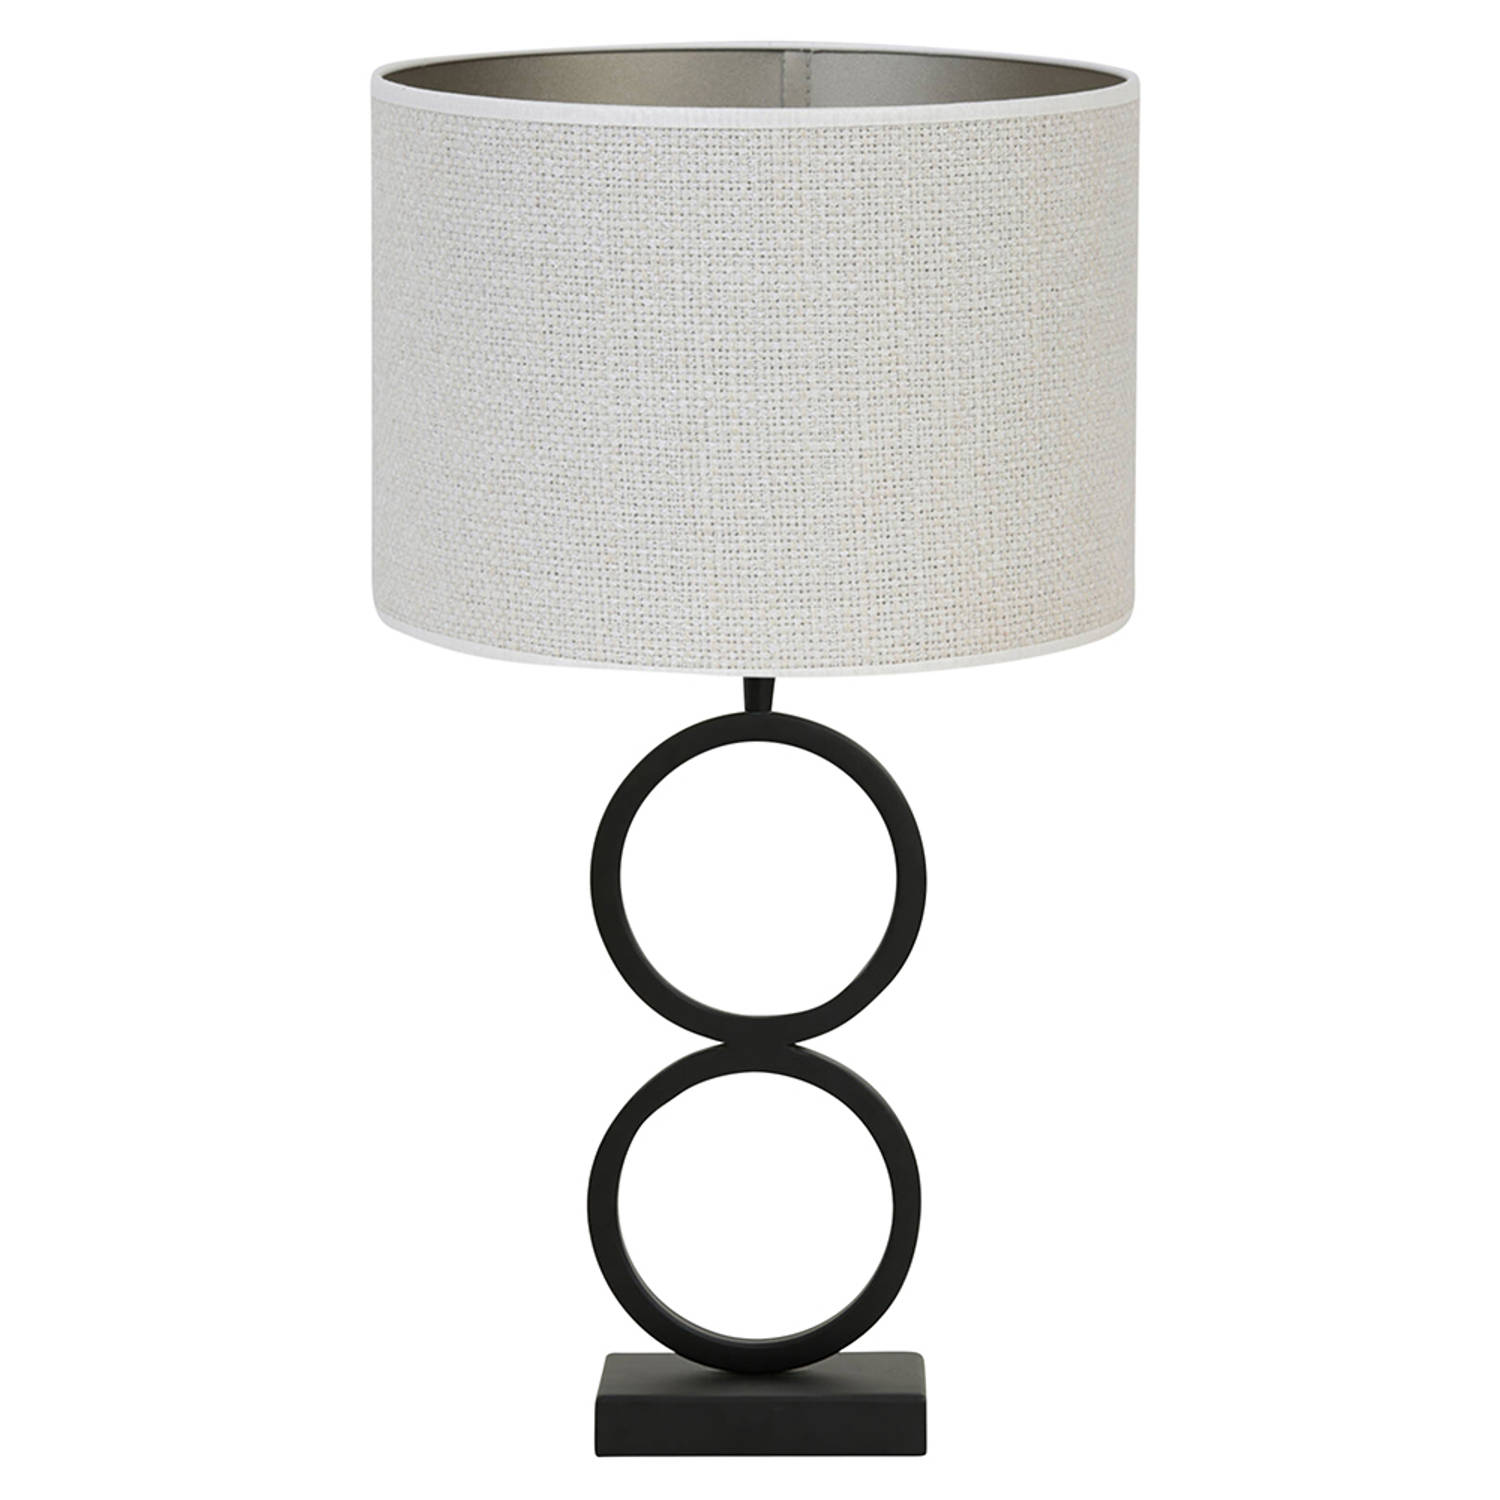 Light and Living Stelios tafellamp - Ø 30 cm - E27 (grote fitting) - wit